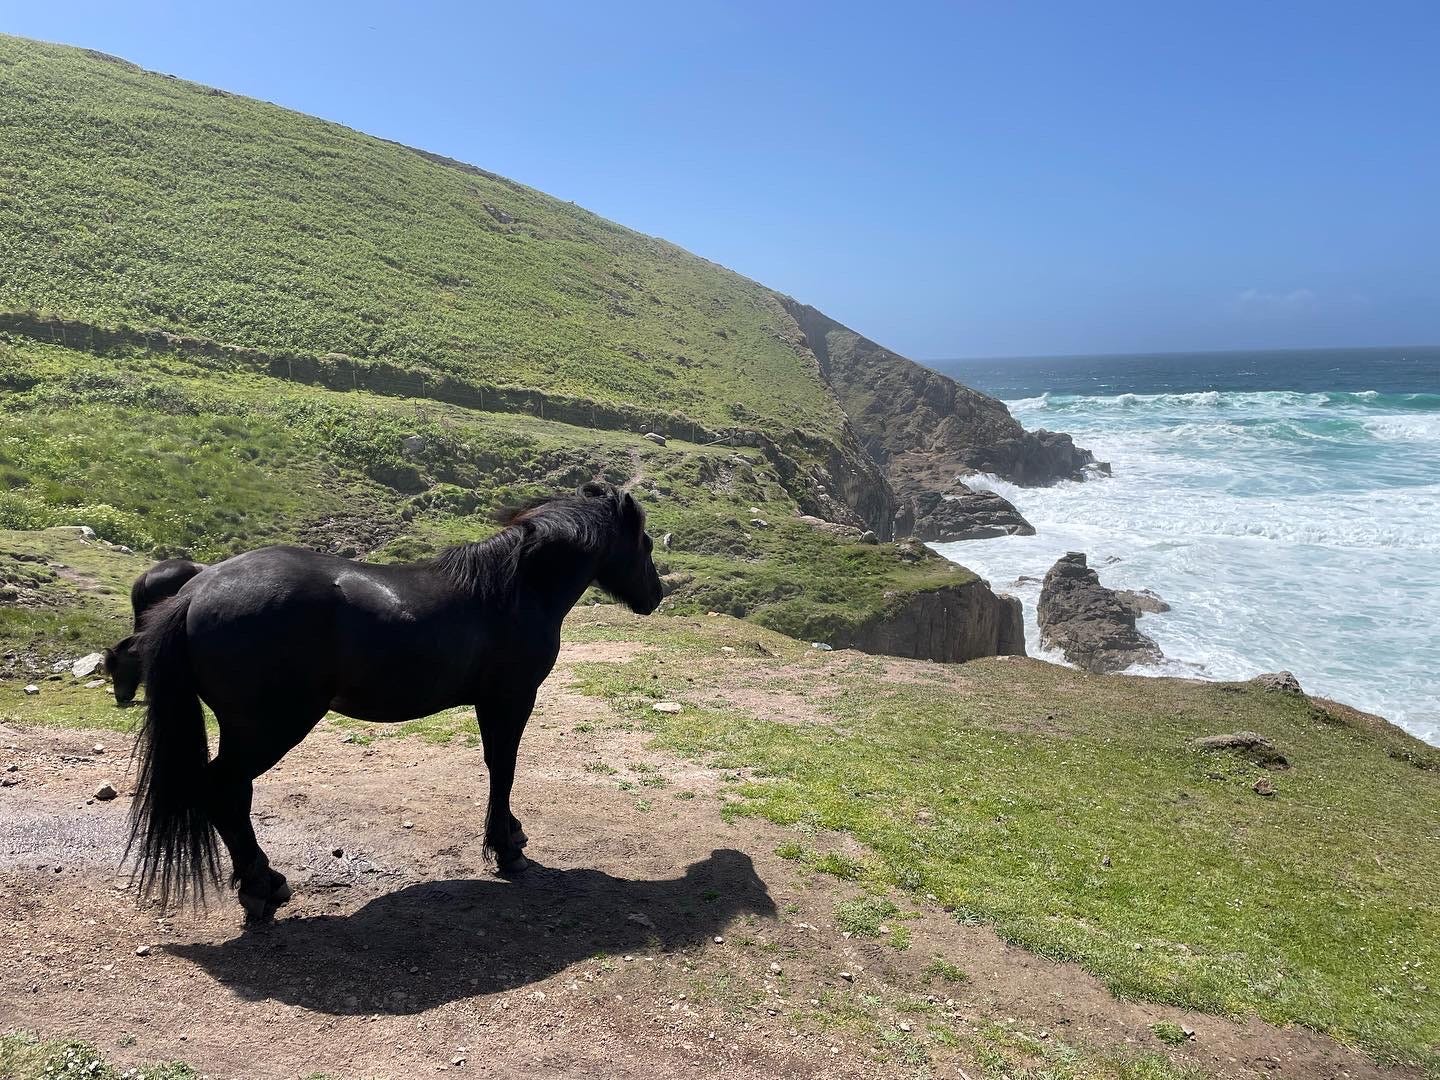 Colour photo of a black pony standing on a coastaline and looking out to the sea.